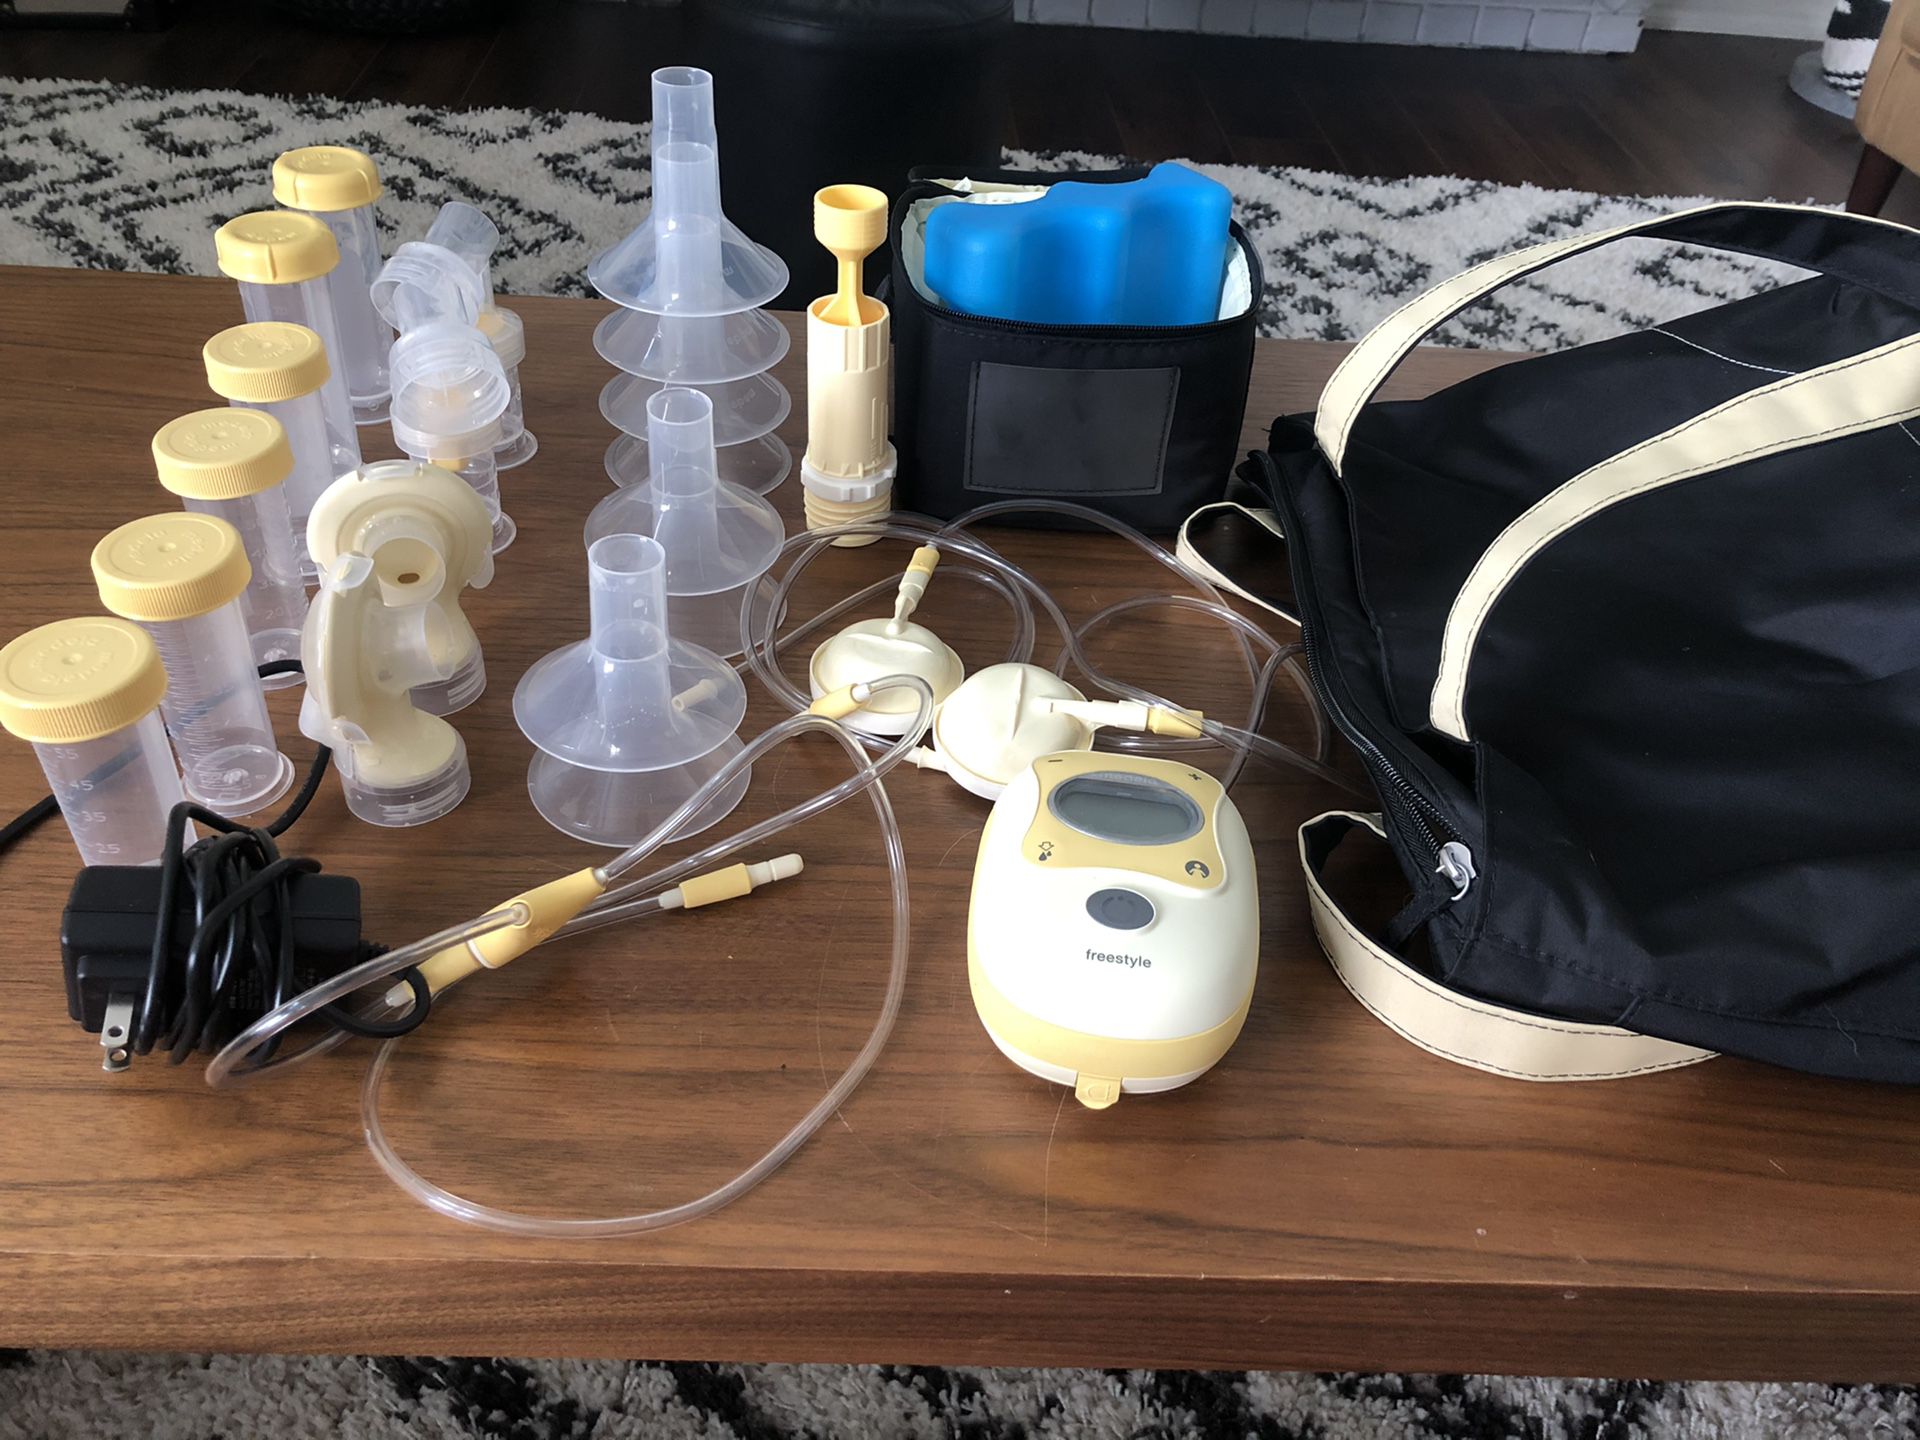 Medela Freestyle Double Electric Hands-Free Breast Pump & Accessories - includes everything you need!